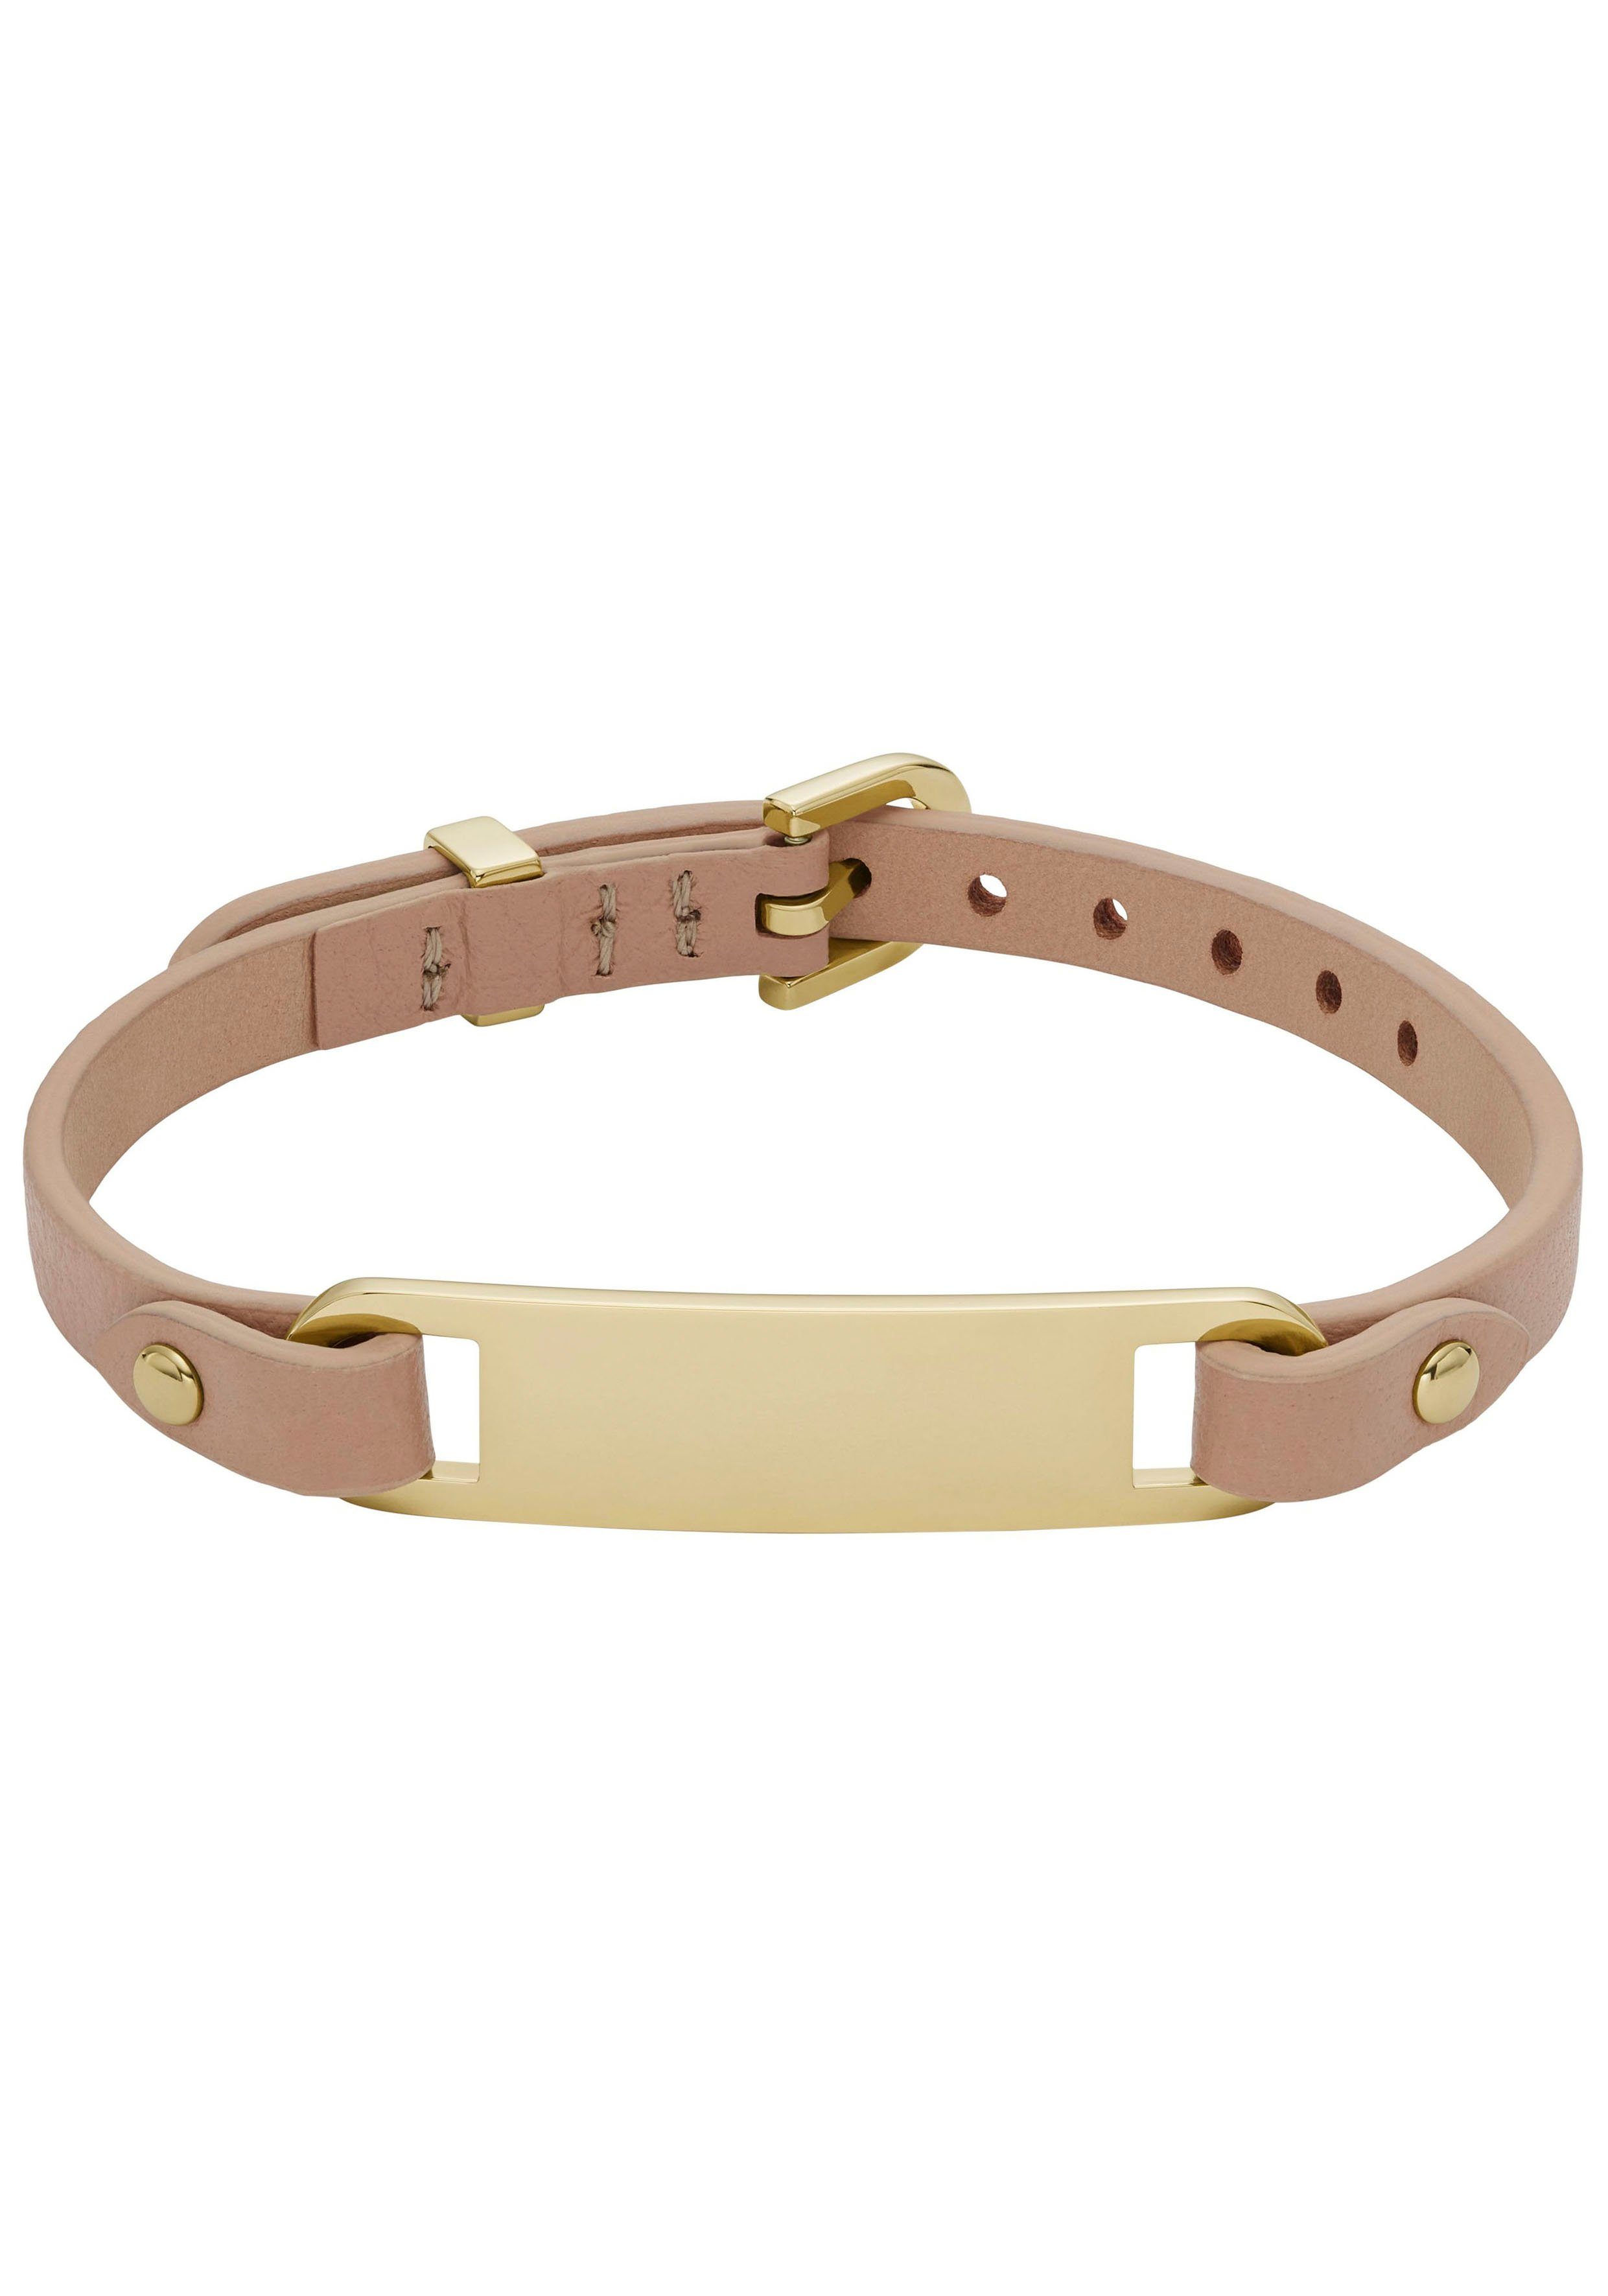 JF04434710 Armband Fossil gelbgoldfarben-nude HERITAGE, JF04433710,